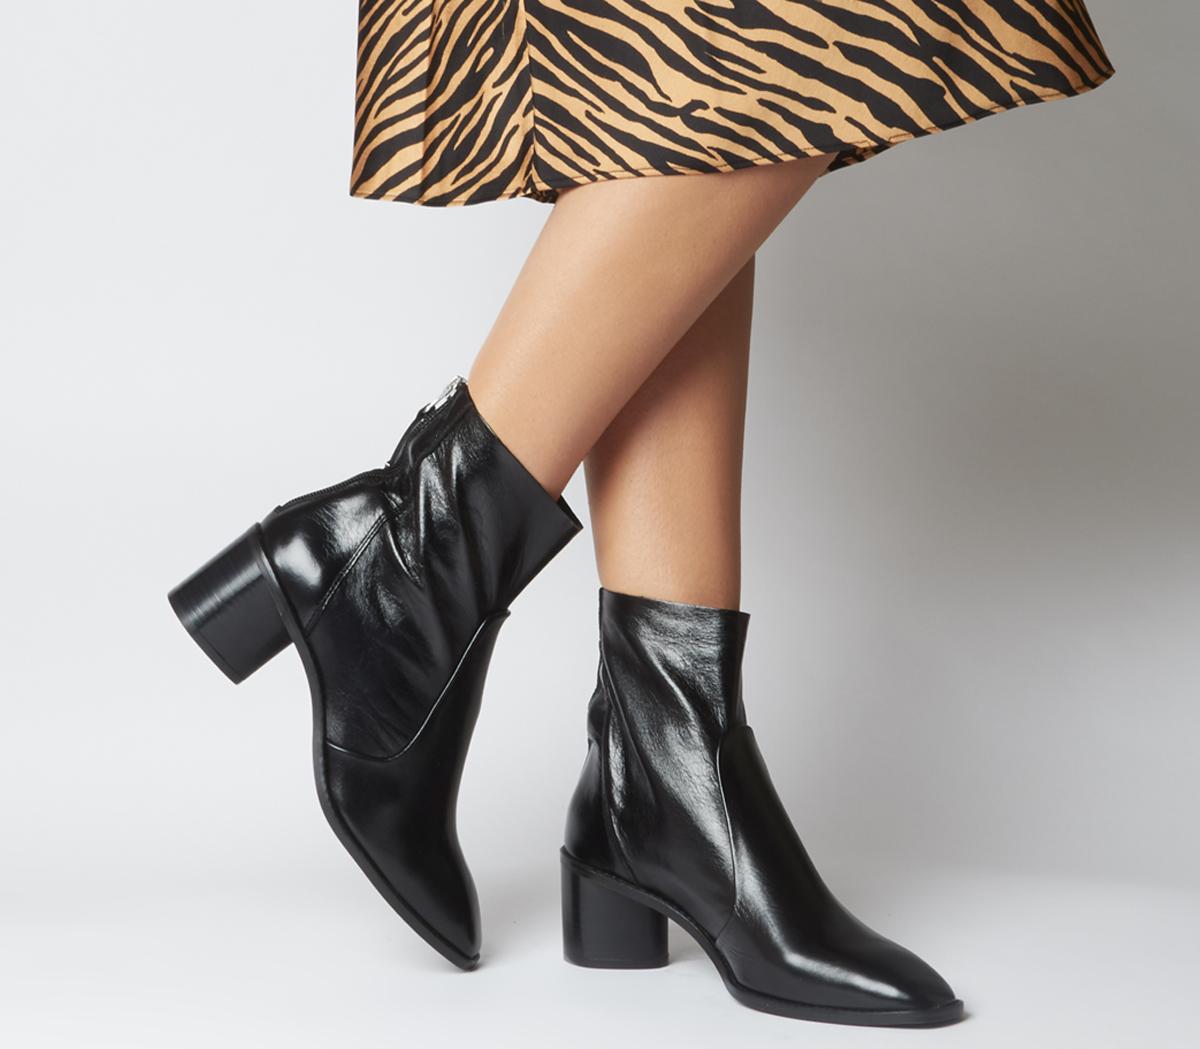 black leather high ankle boots